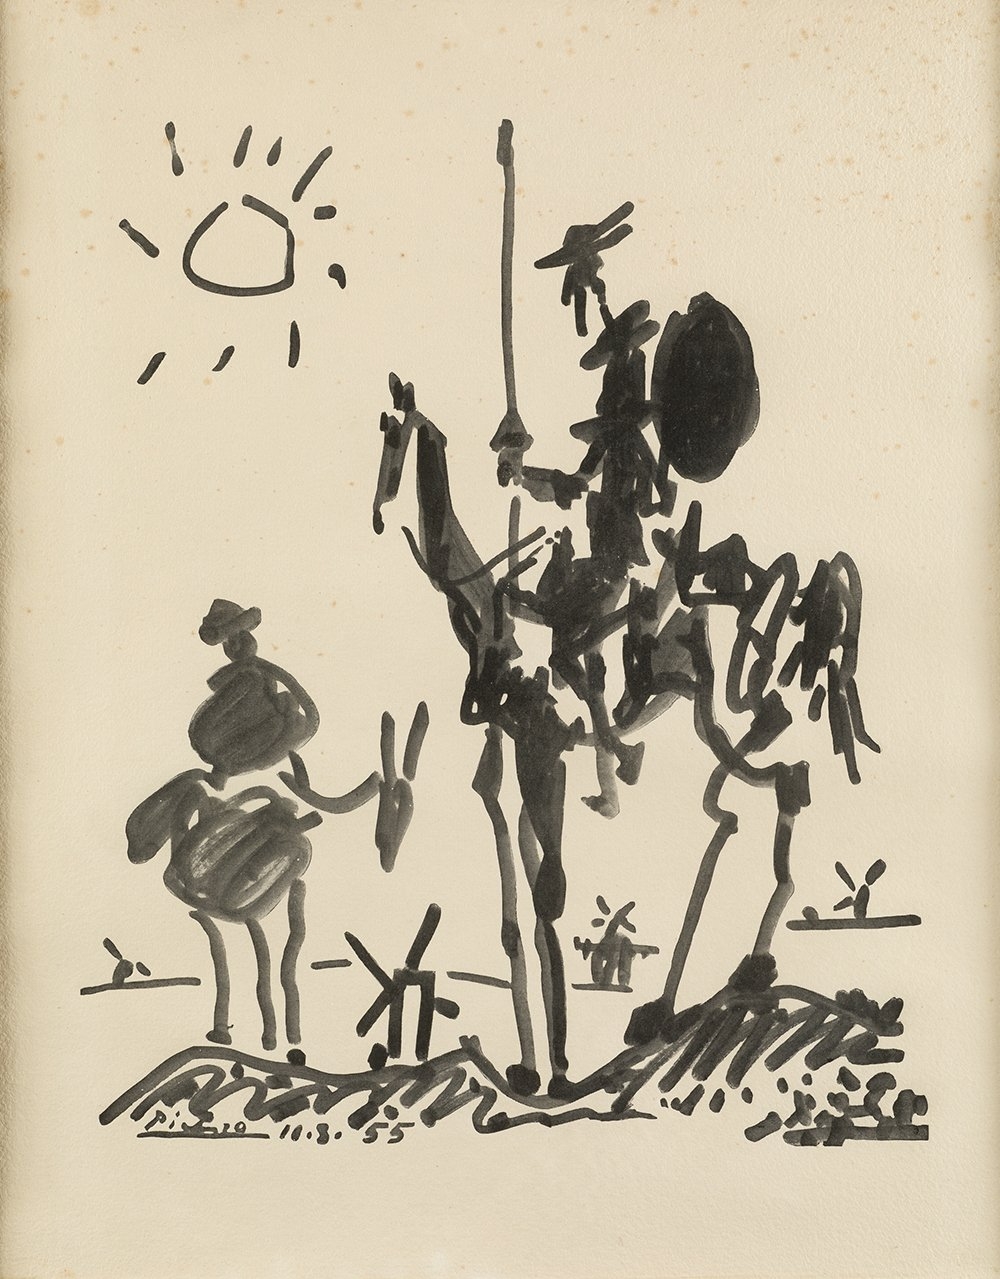 "Don Quijote y Sancho" by Pablo Picasso, 1955